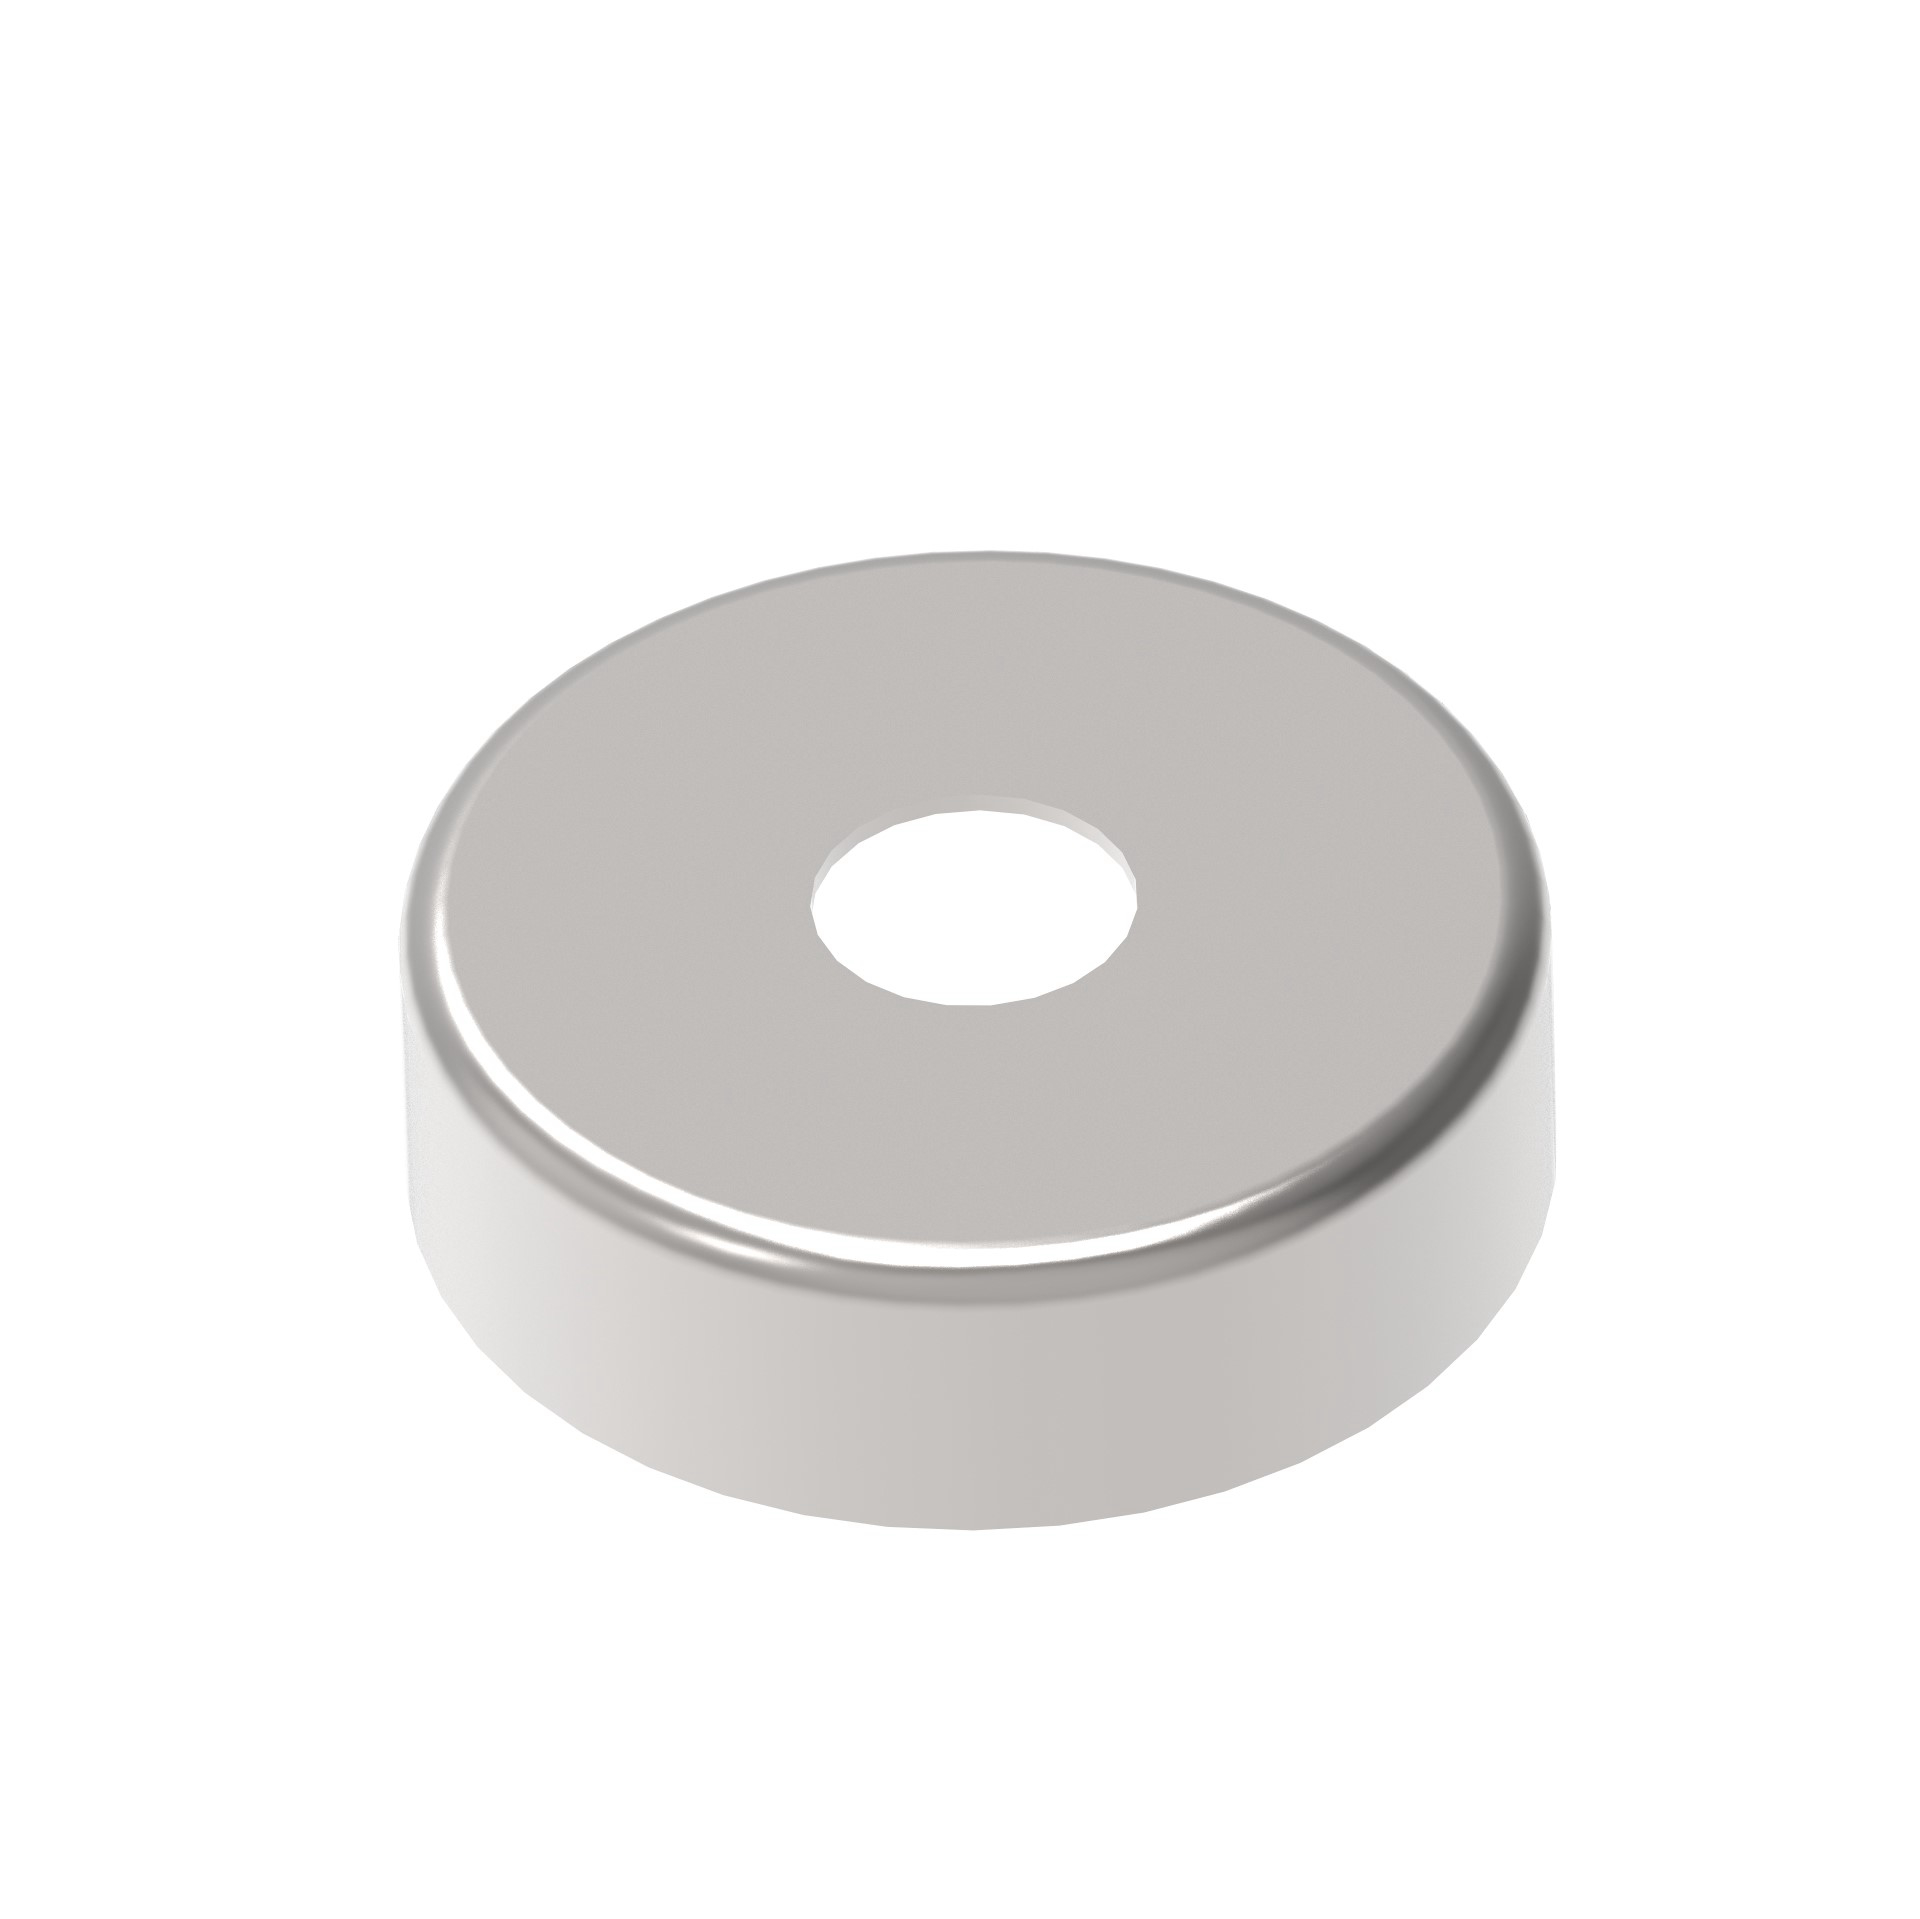 304 316 Stainless Steel Base Cover